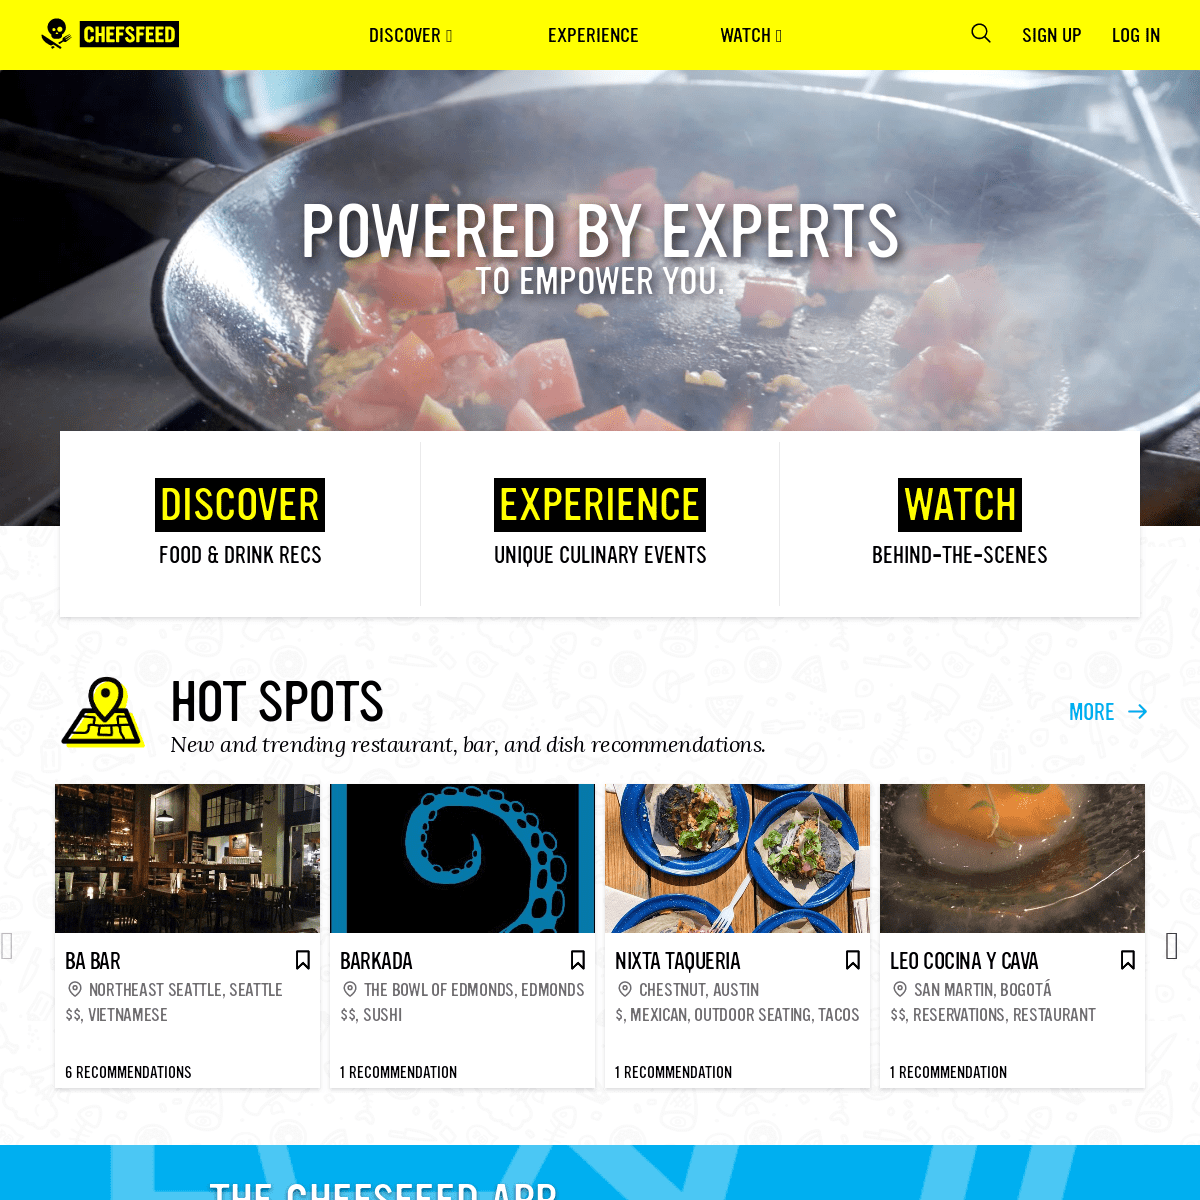 A complete backup of chefsfeed.com